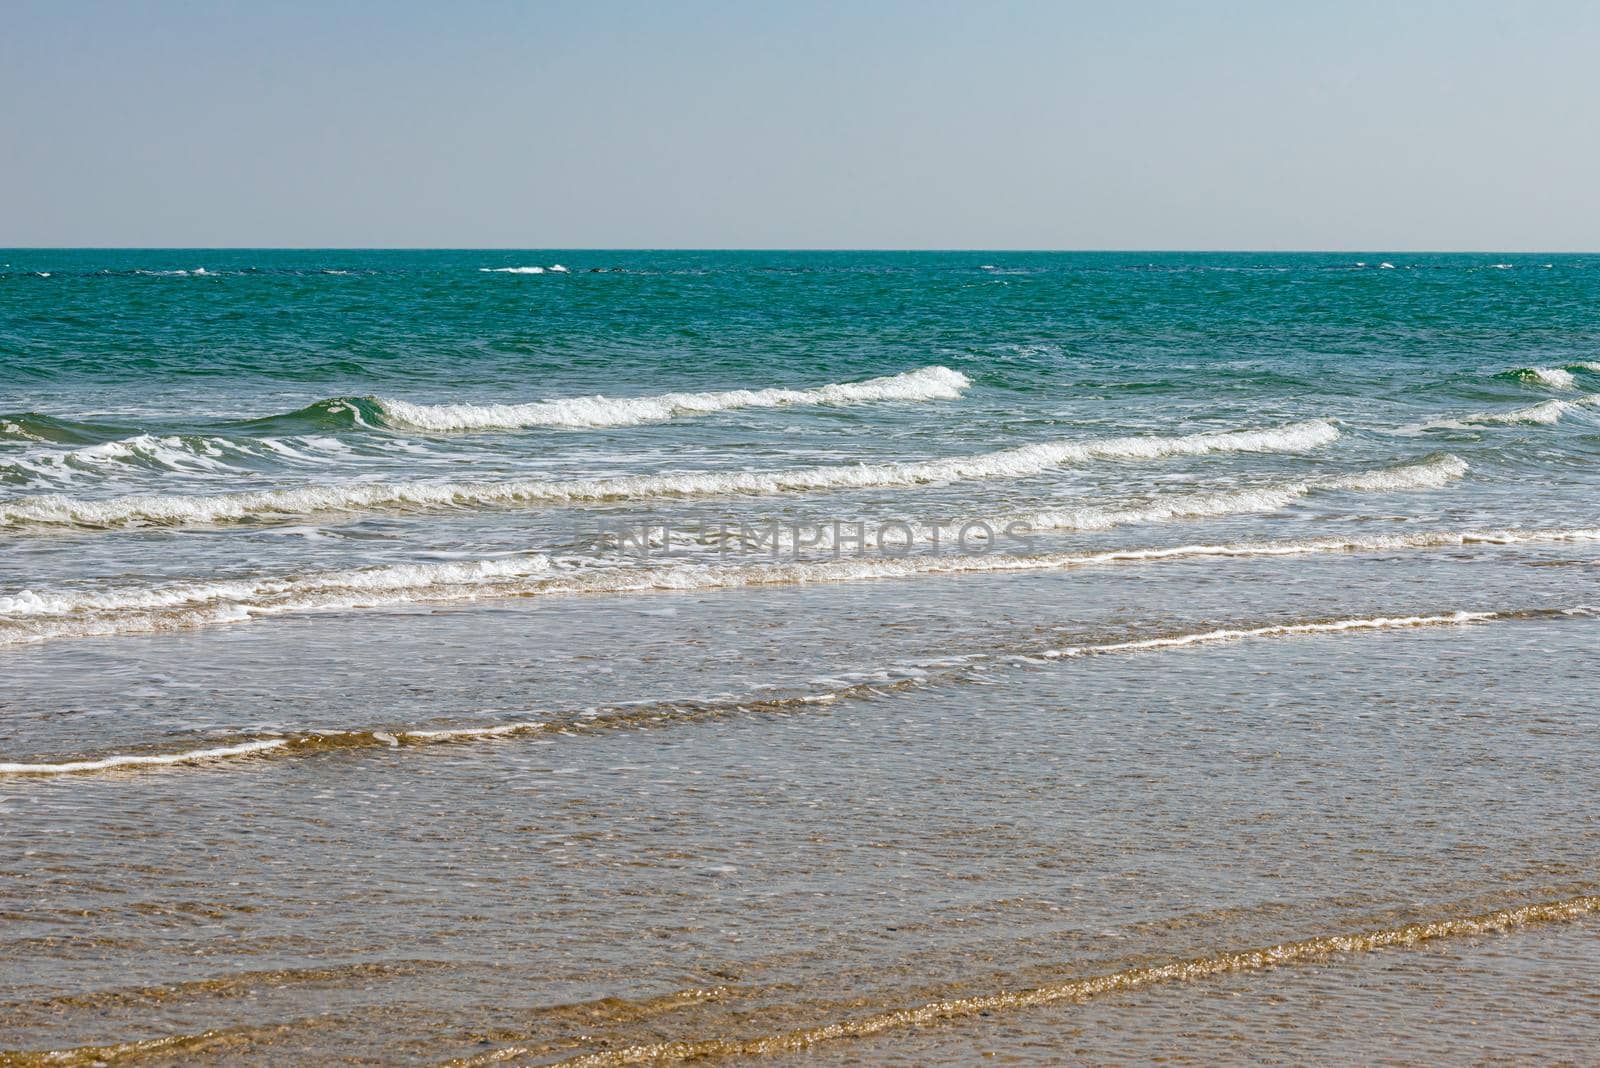 View of the Adriatic Sea from the sandy beach in Pesaro, Italy by MaxalTamor